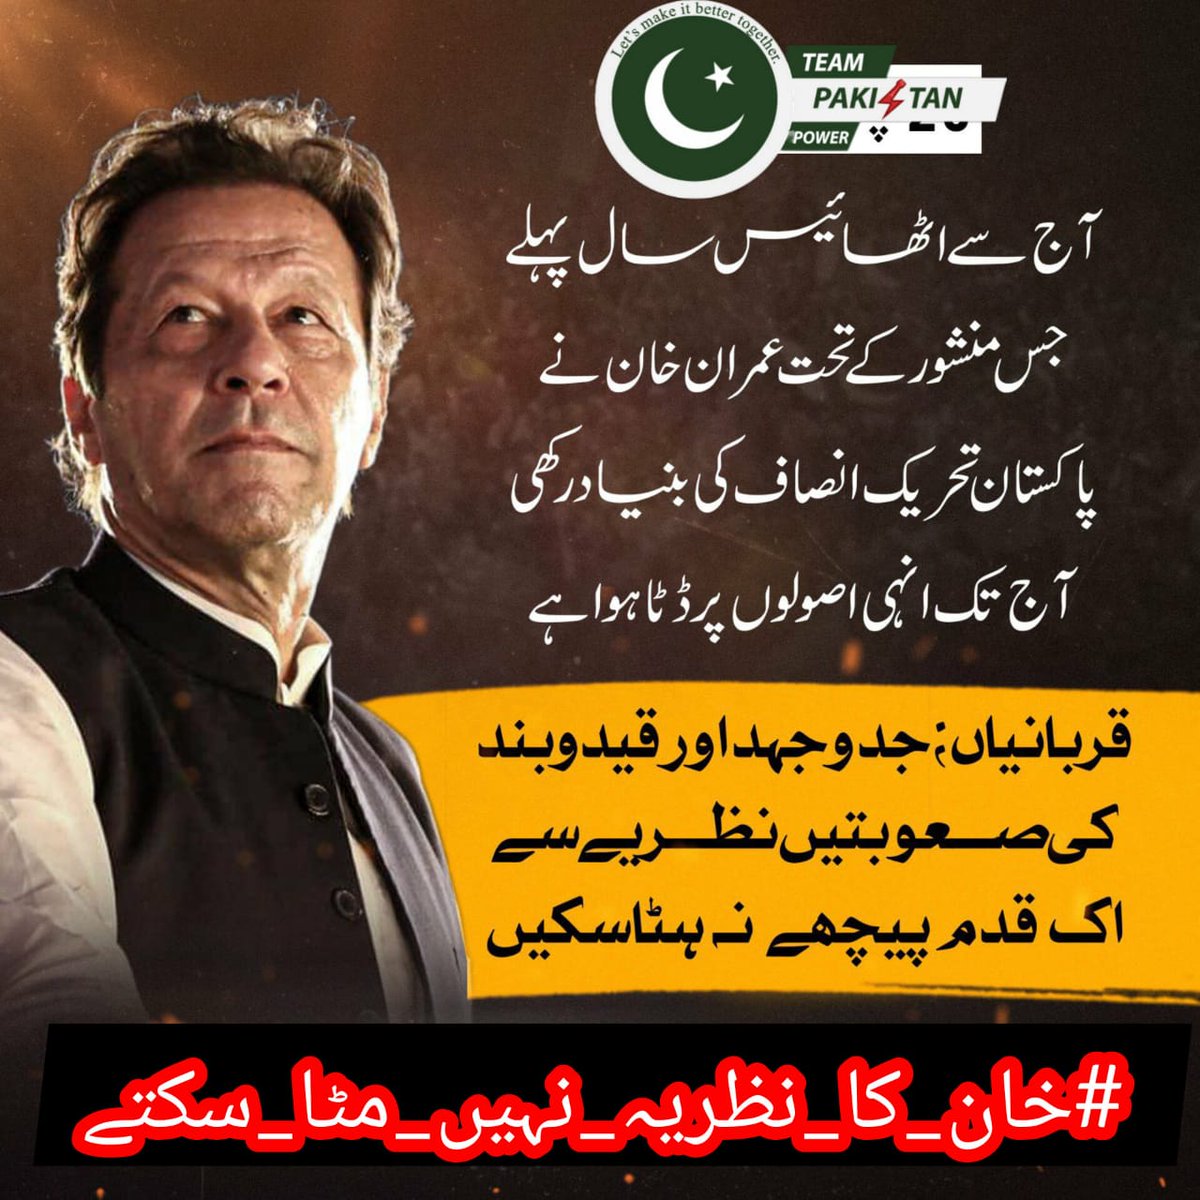 Till 11 years ago, I Sairakhan had zero knowledge about politics, I had no idea how important democracy is for a prosperous pakistan. All credit goes to Imran who has educated us all about our constitutional rights. Just Imran Khan #خان_کا_نظریہ_نہیں_مٹا_سکتے @TeamPakPower